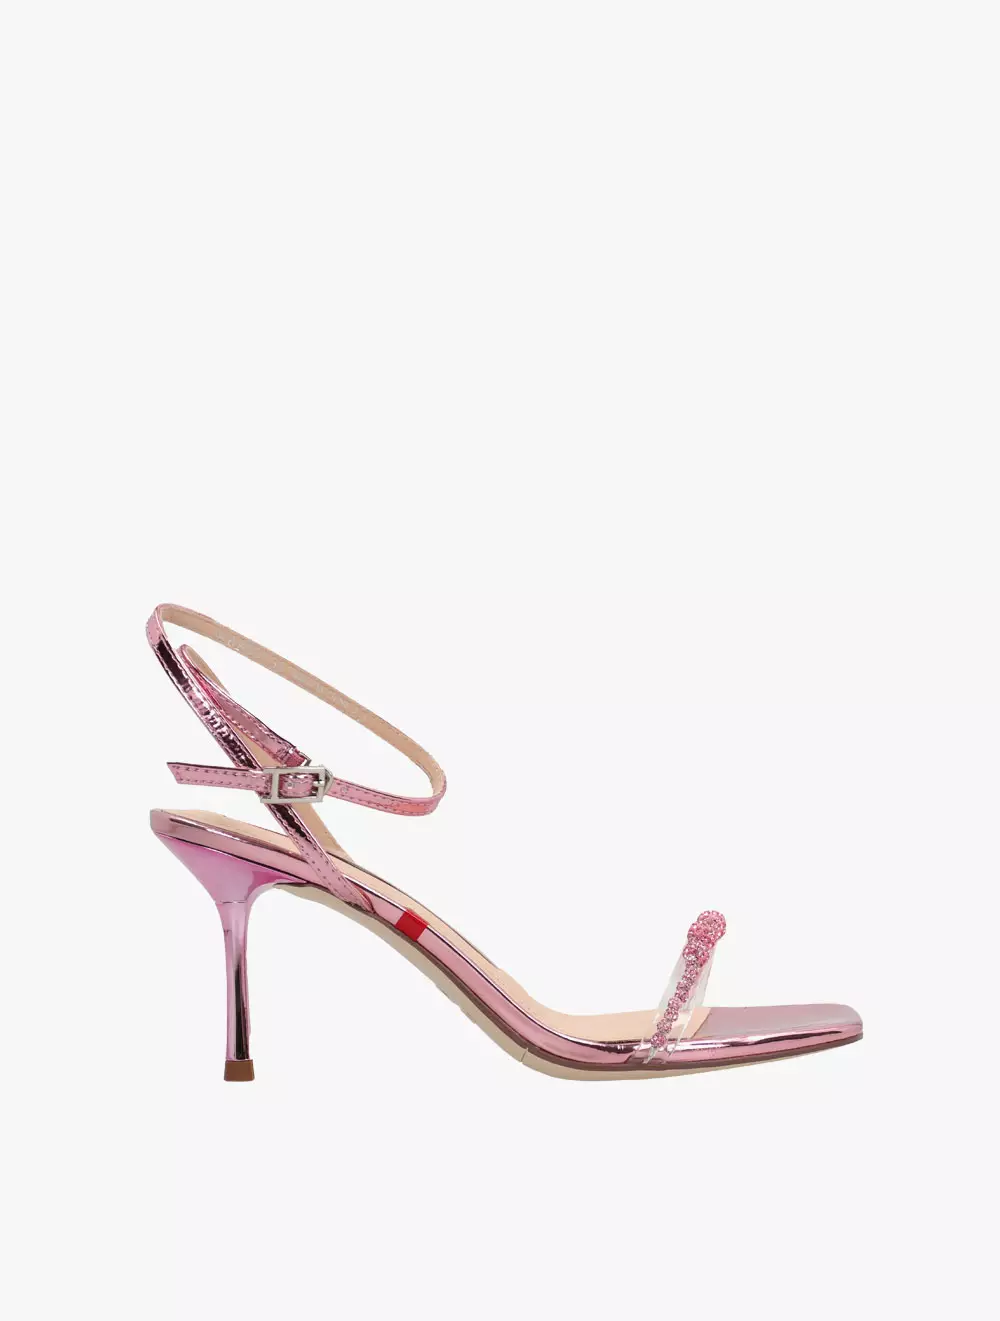 Jual STACCATO Staccato SC7 SM23 W EBB36 Women's Heels - Pink - Pink ...